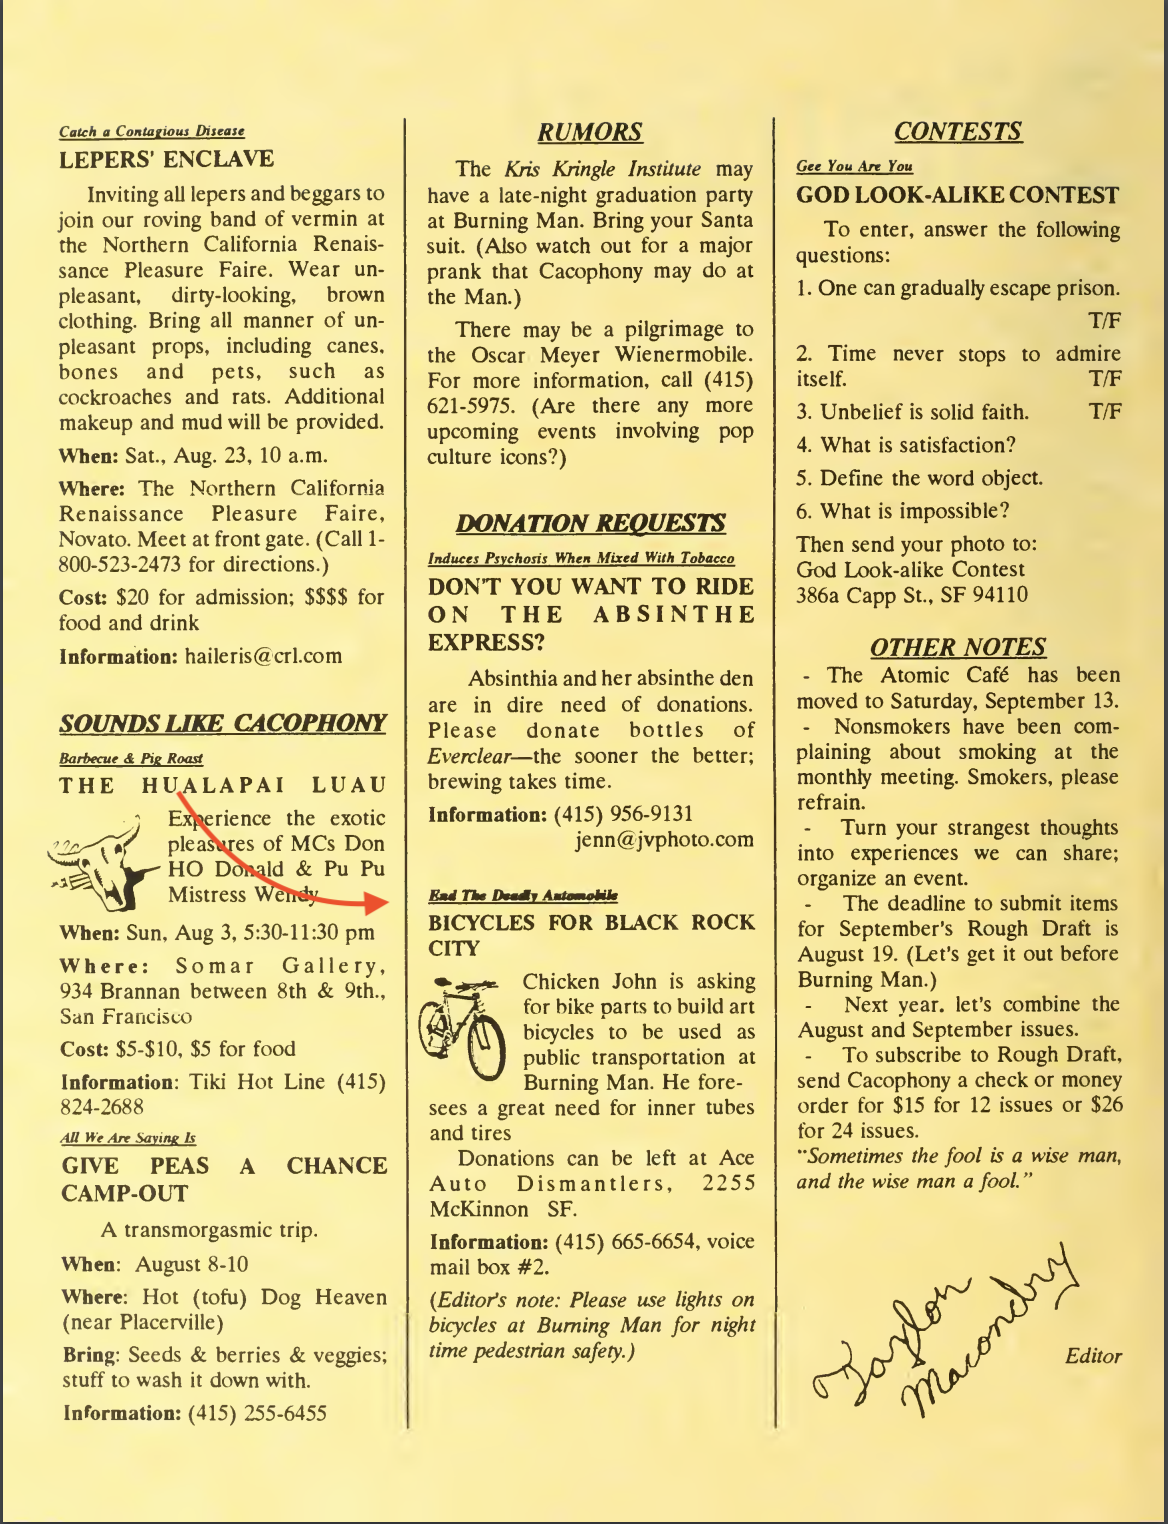 Aug 1997 - Bikes for Burning Man request.png